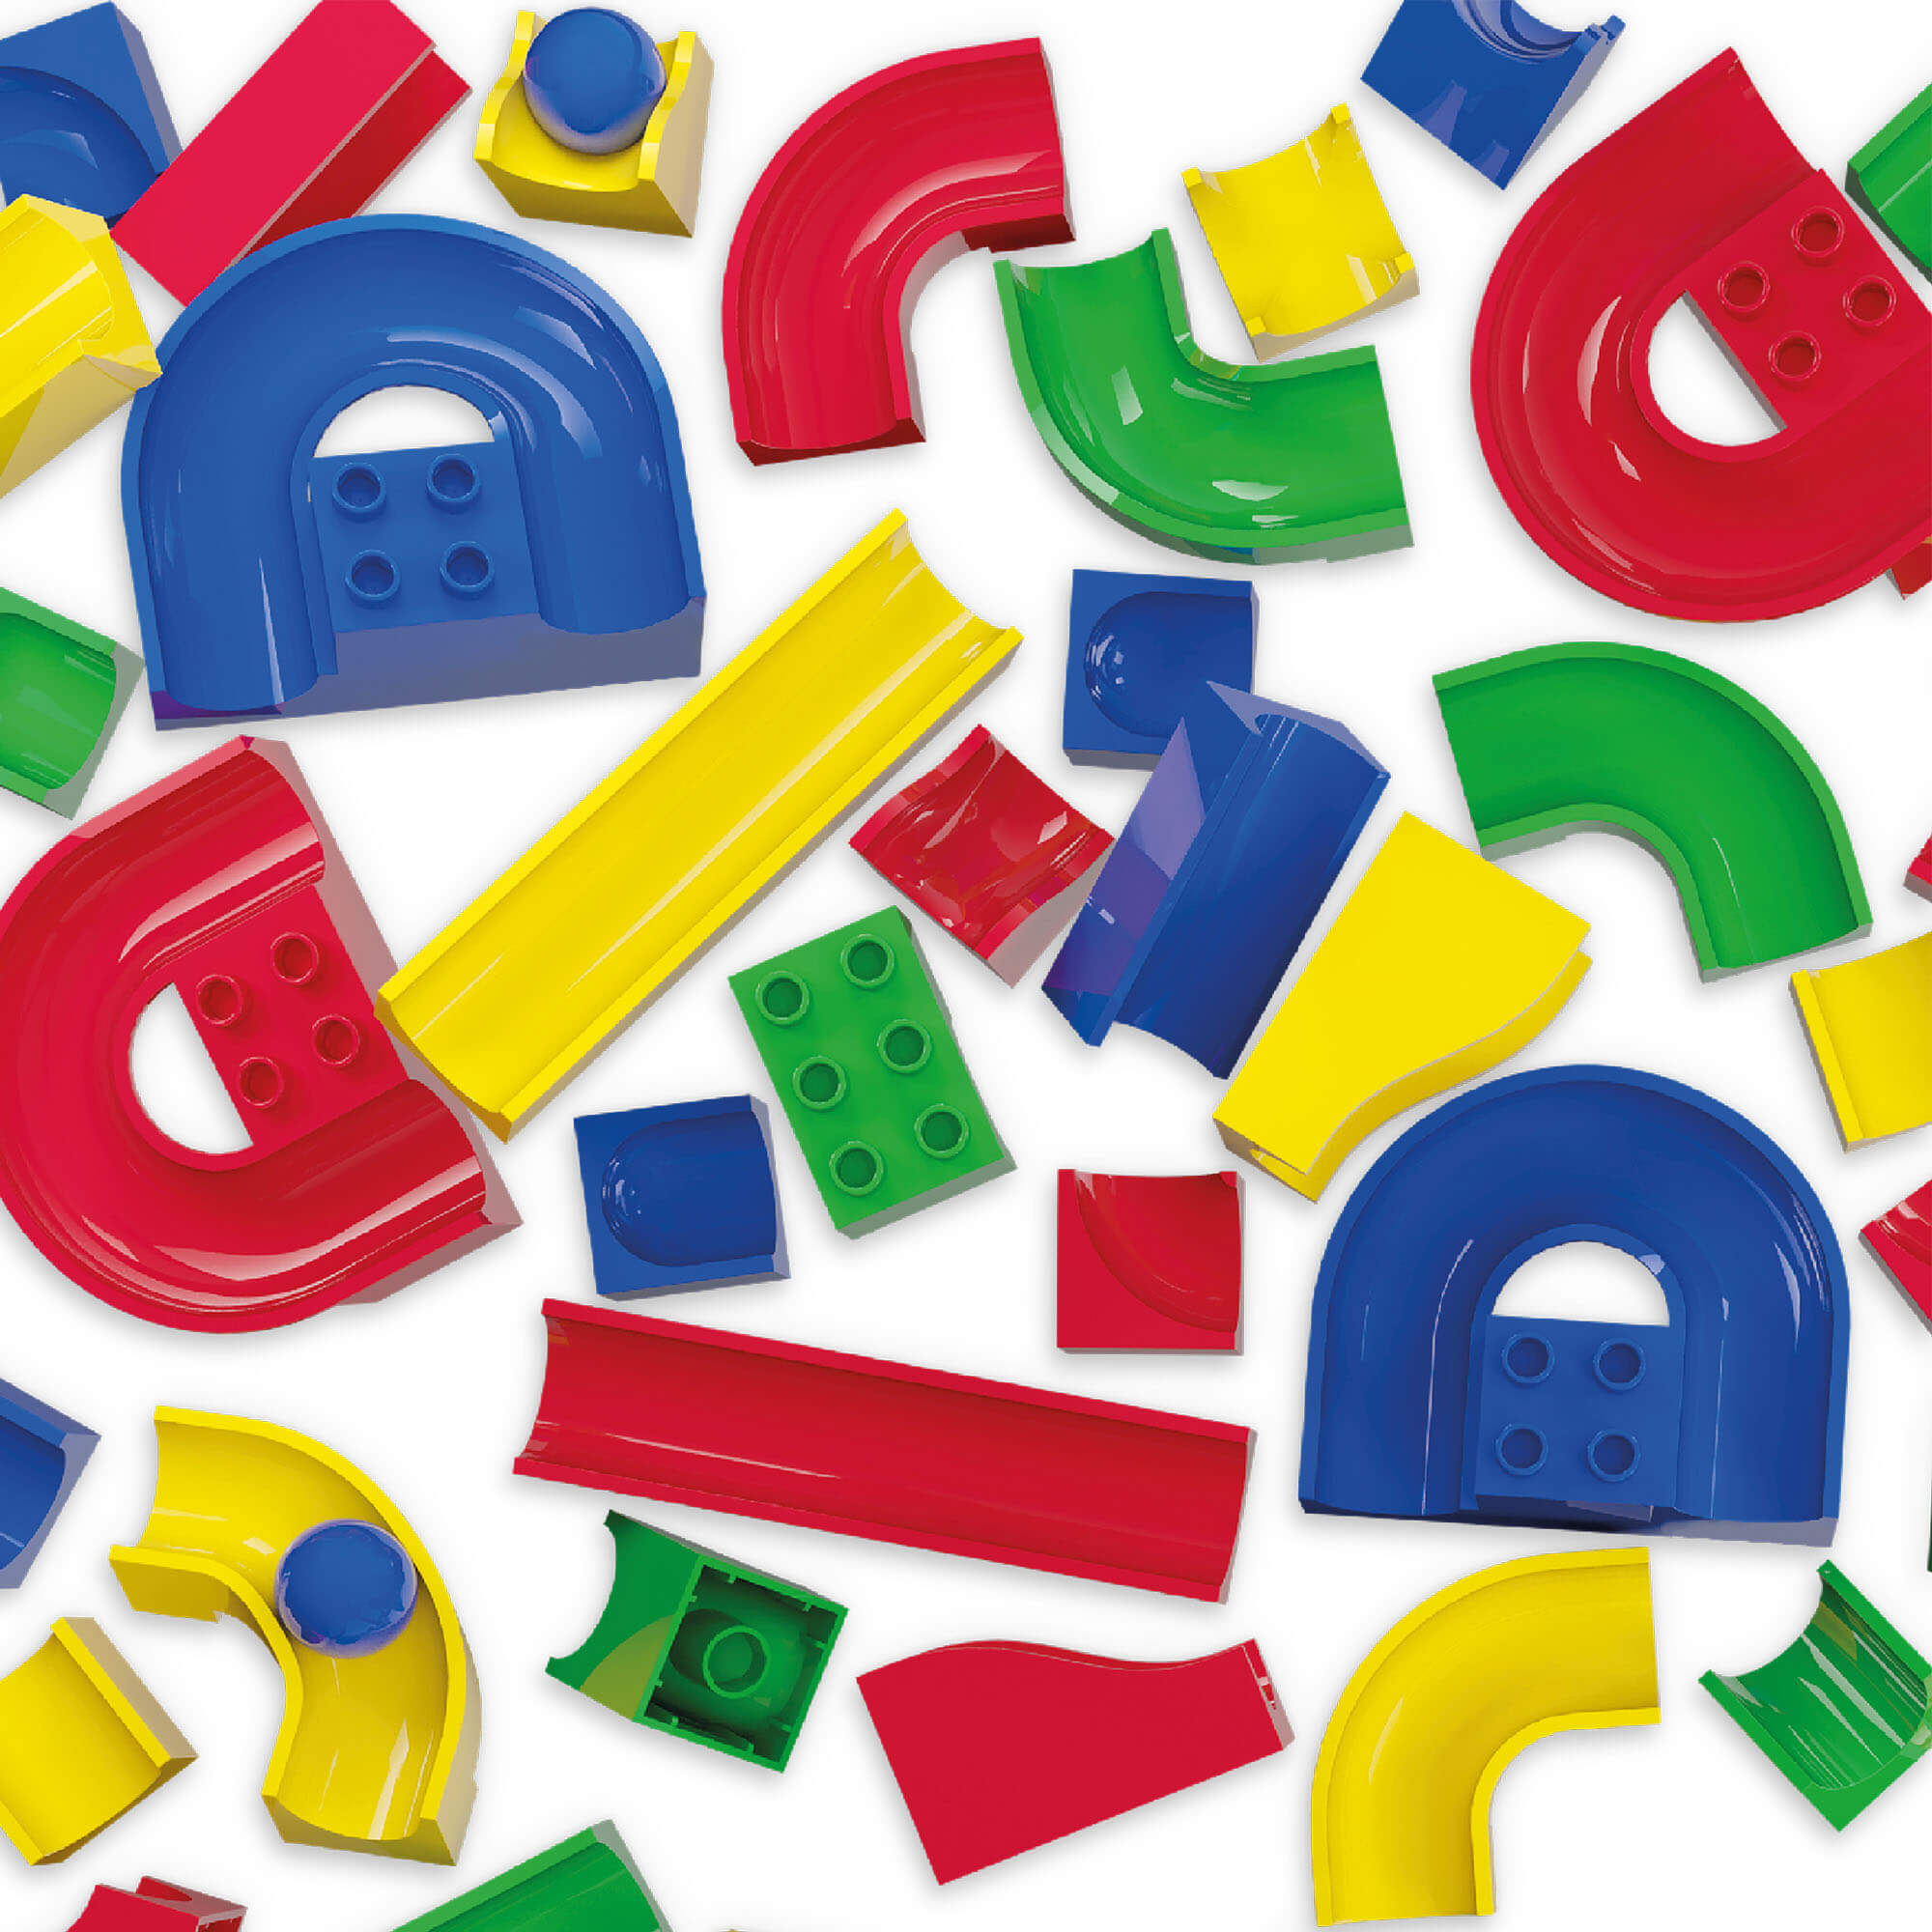 toy blocks laid out against a white backdrop